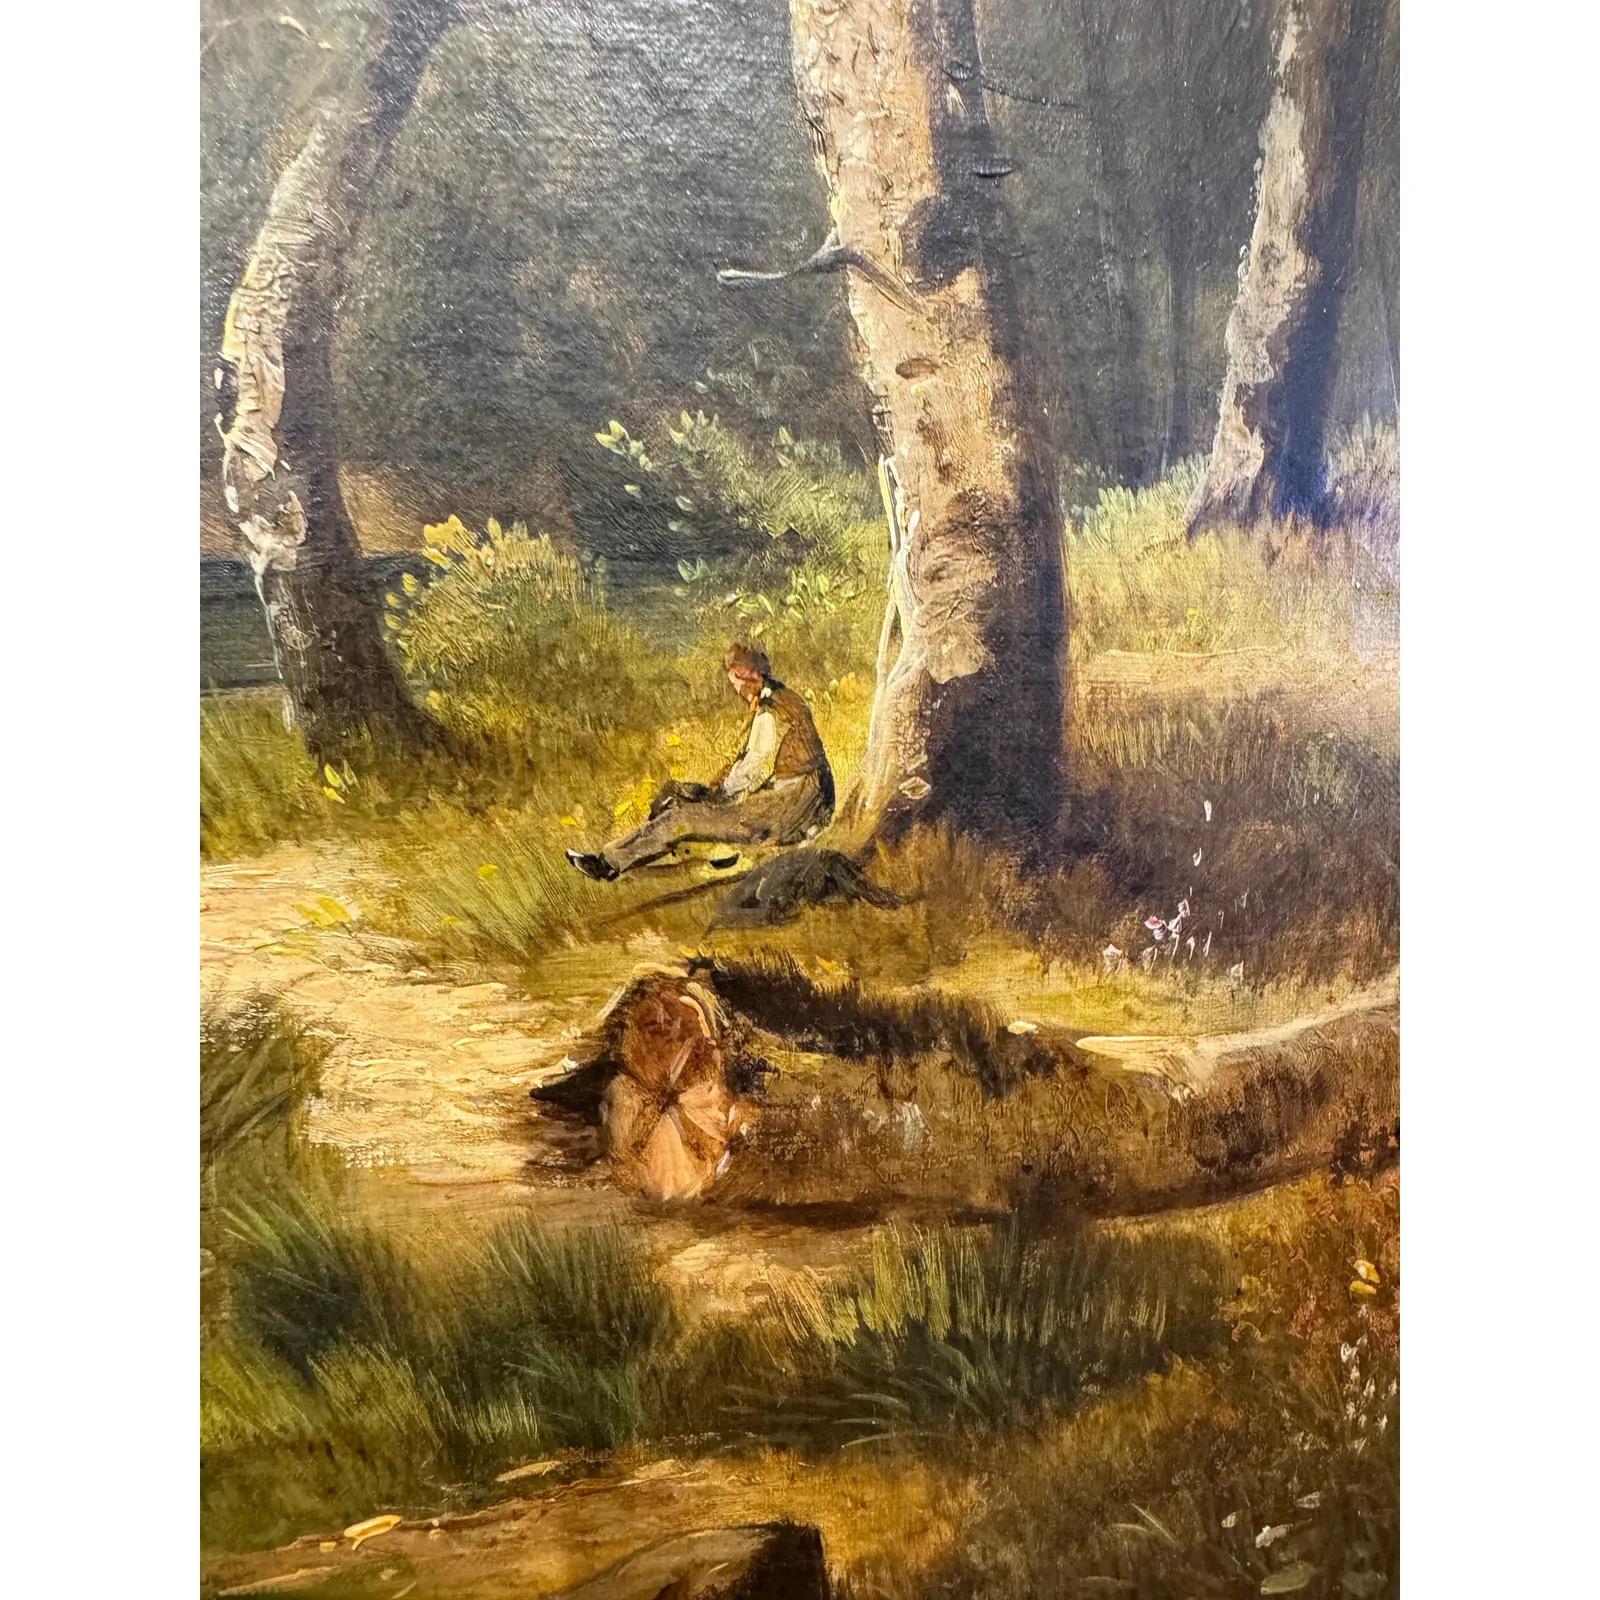 This captivating landscape oil painting captures the essence of nature with a logger seated in a lush green meadow. The vivid hues and intricate details bring the scene to life, inviting viewers to immerse themselves in the tranquility of the